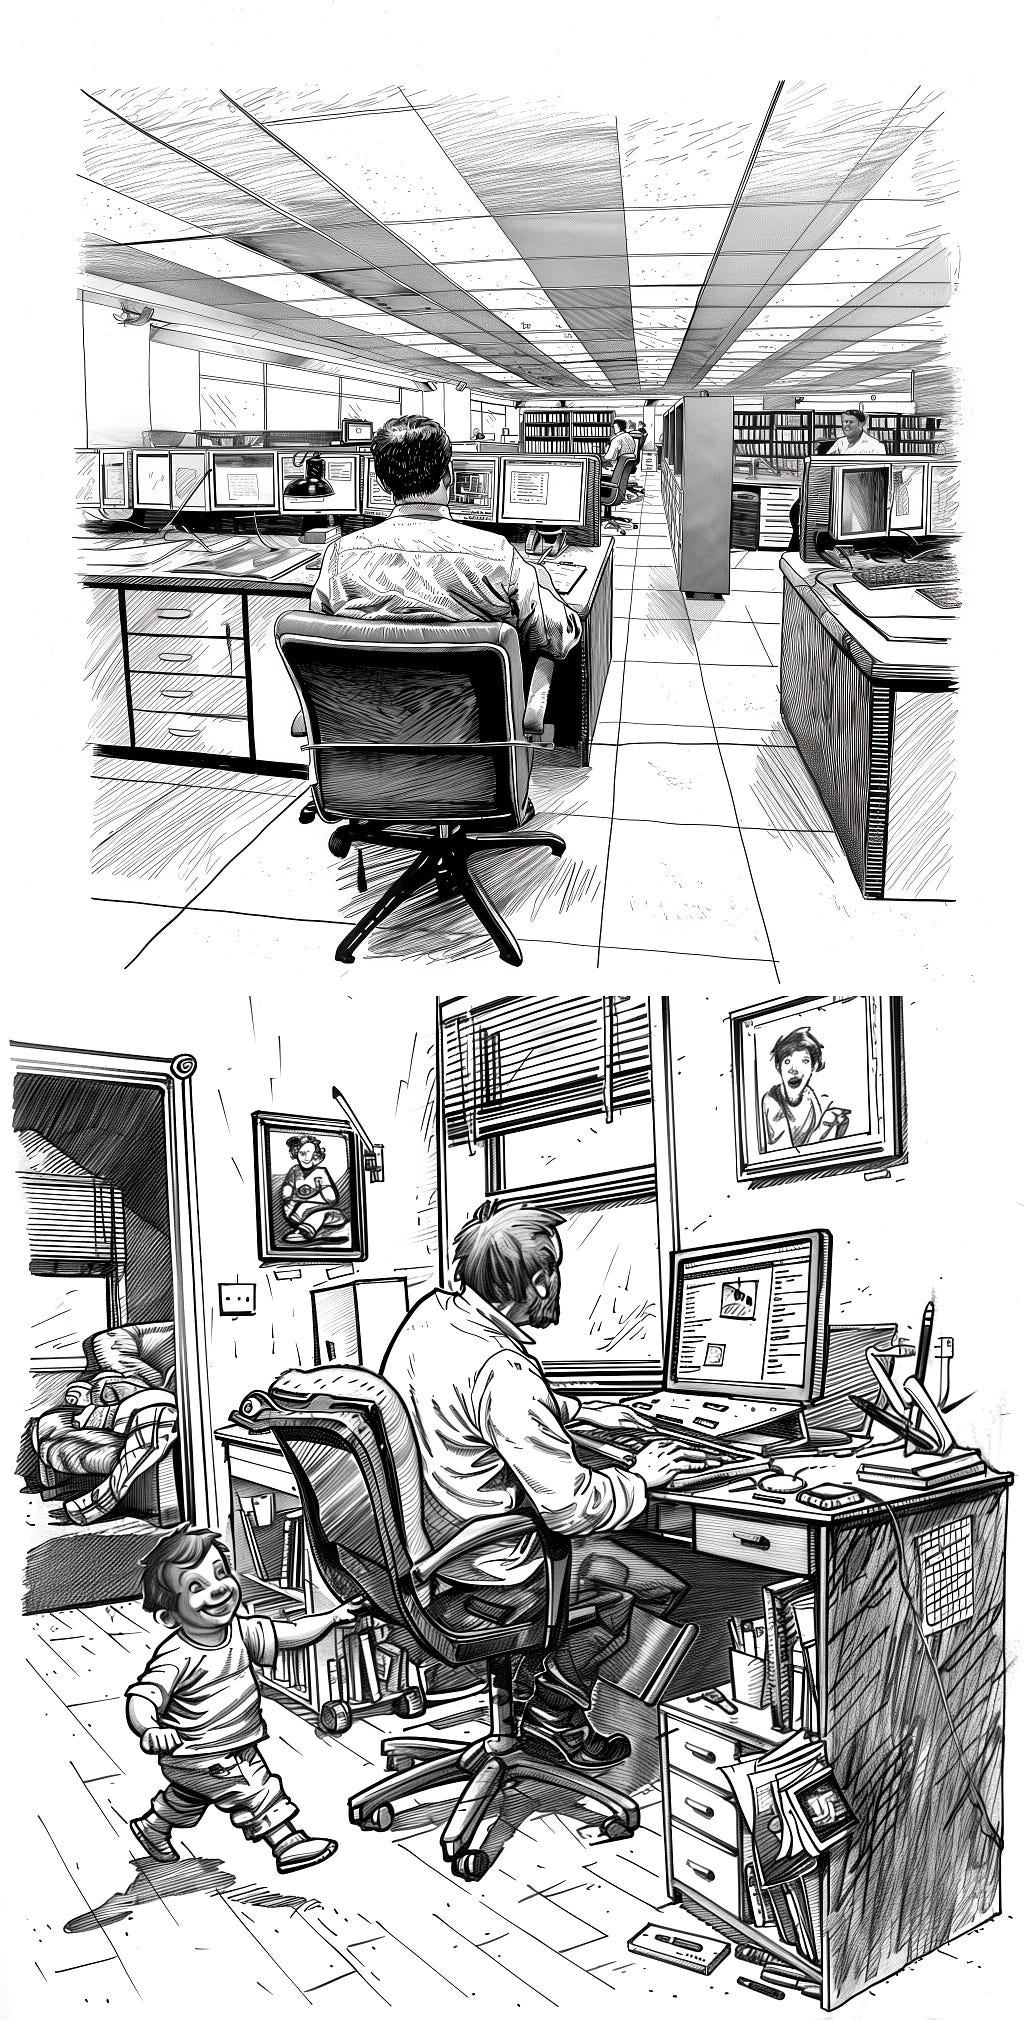 An illustration of a man working from the office versus working from home